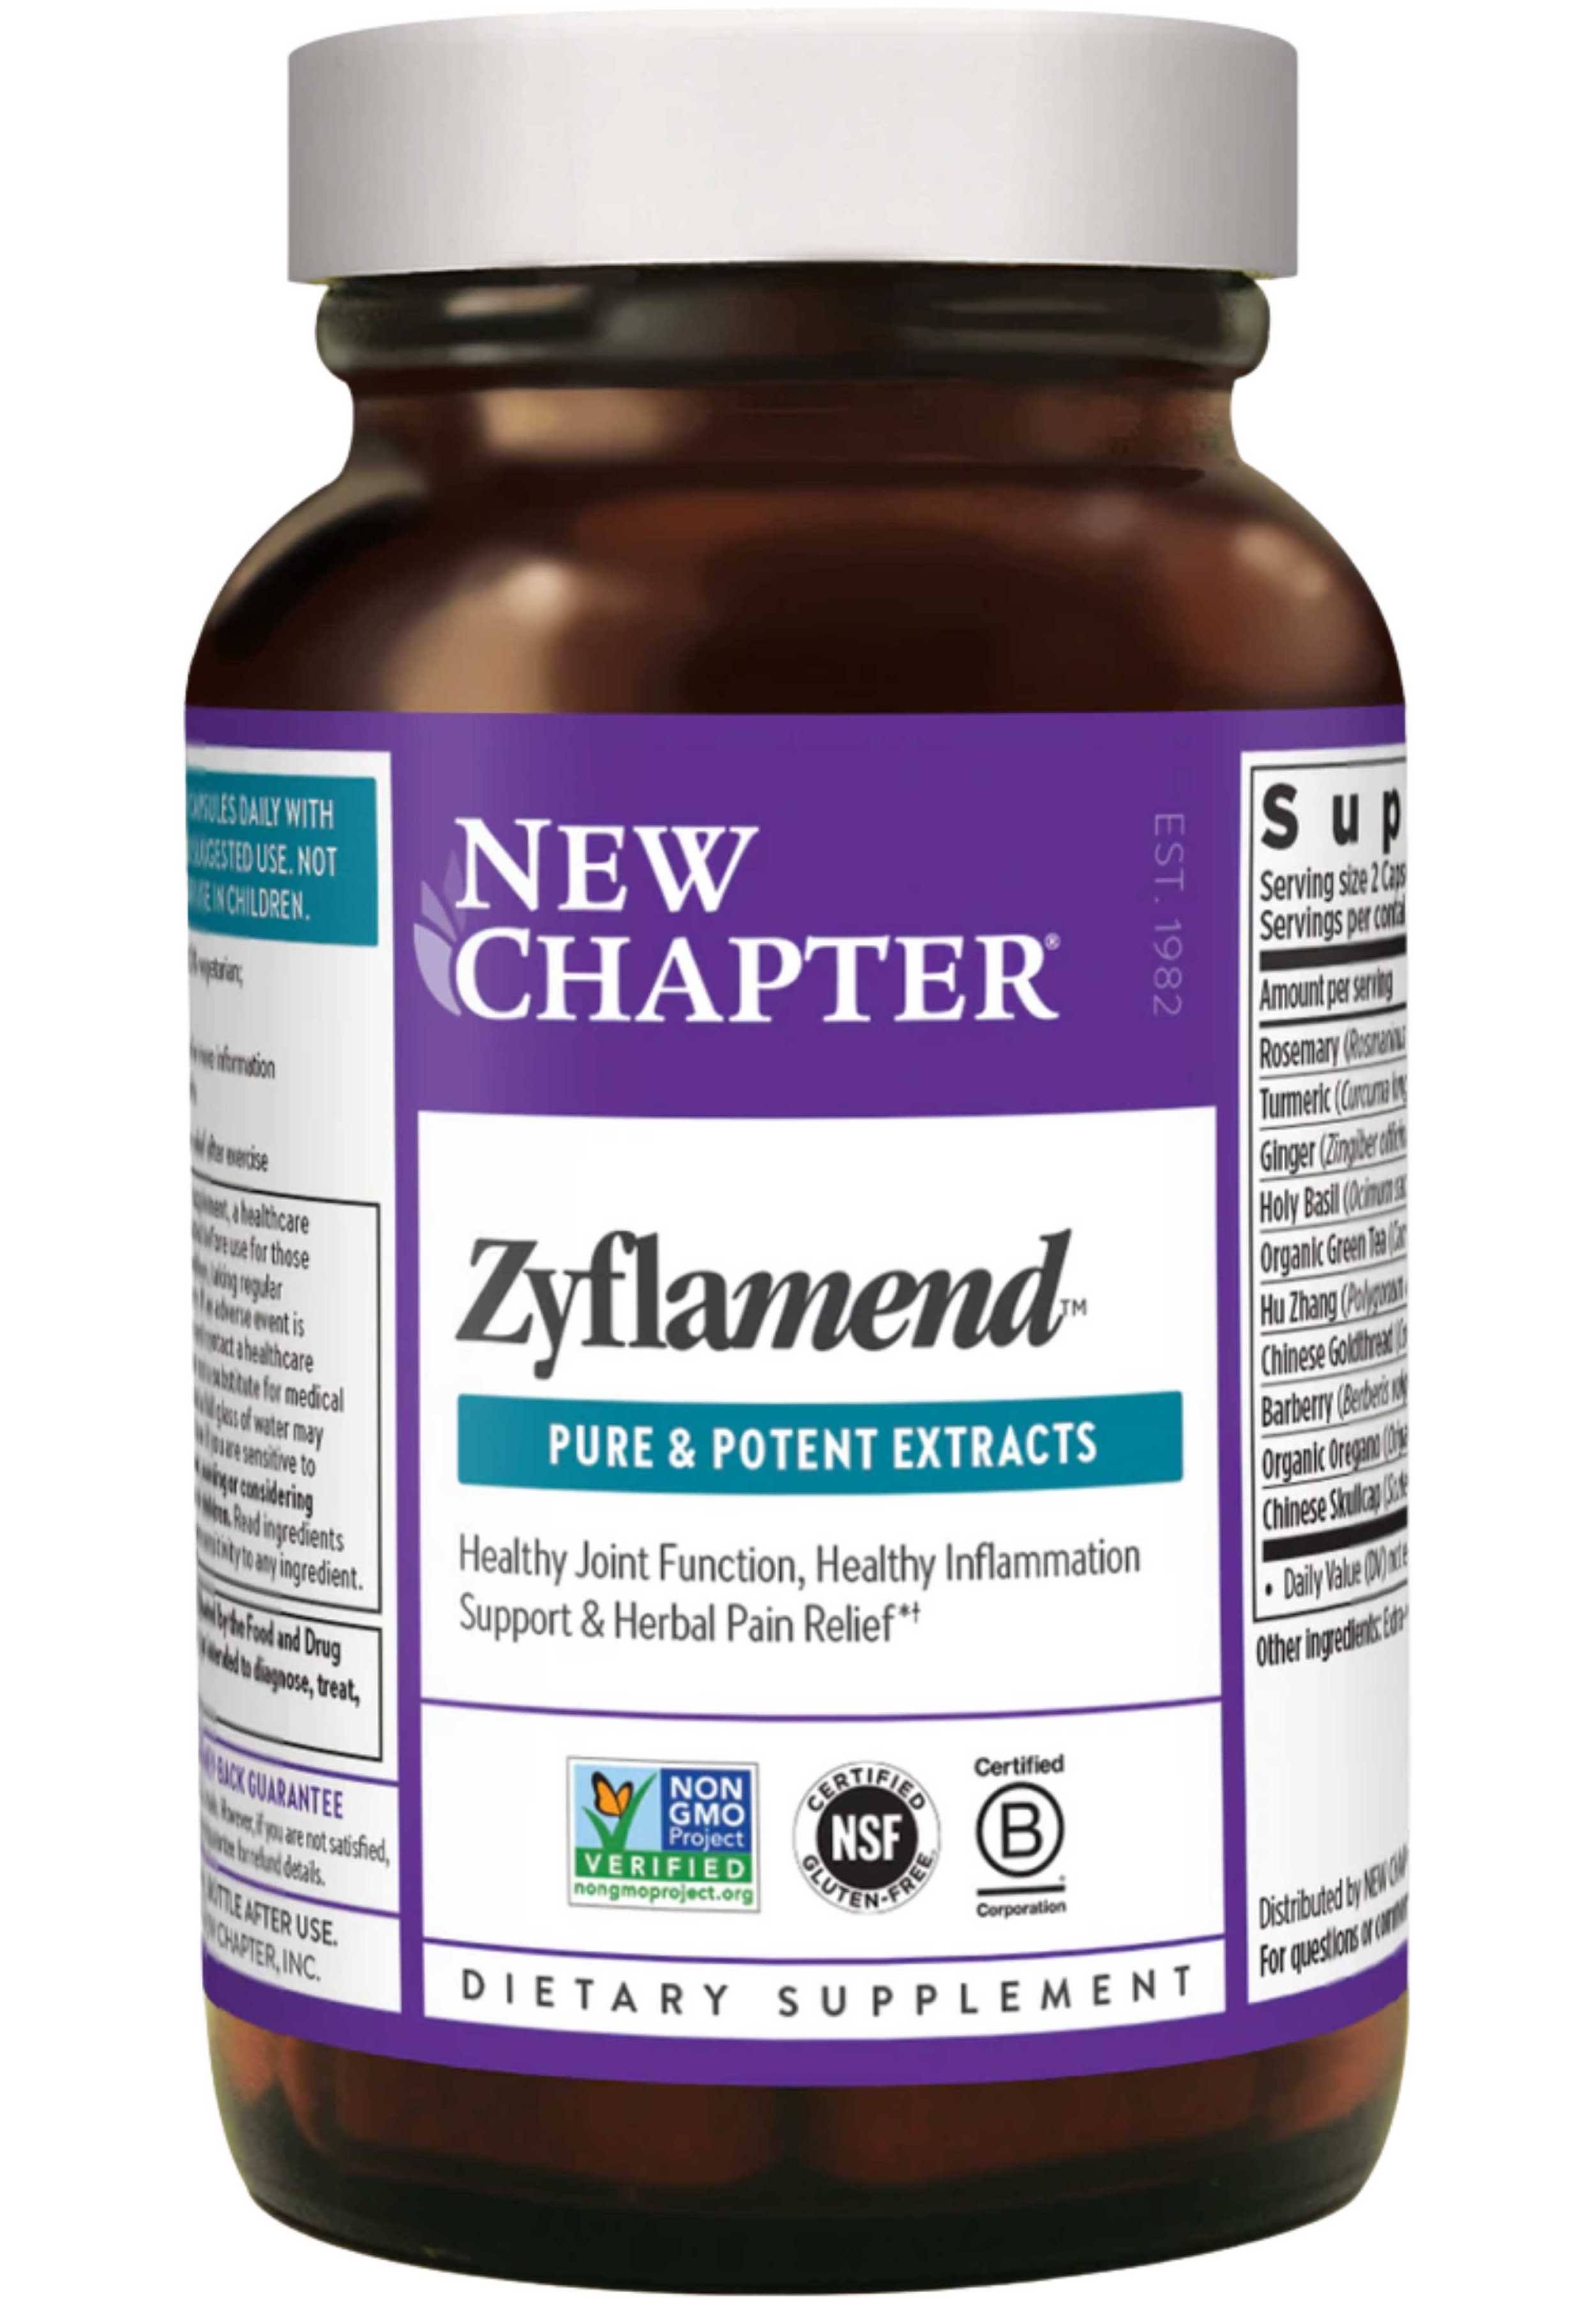 New Chapter Zyflamend Whole Body Supplement - 120 Liquid V-caps